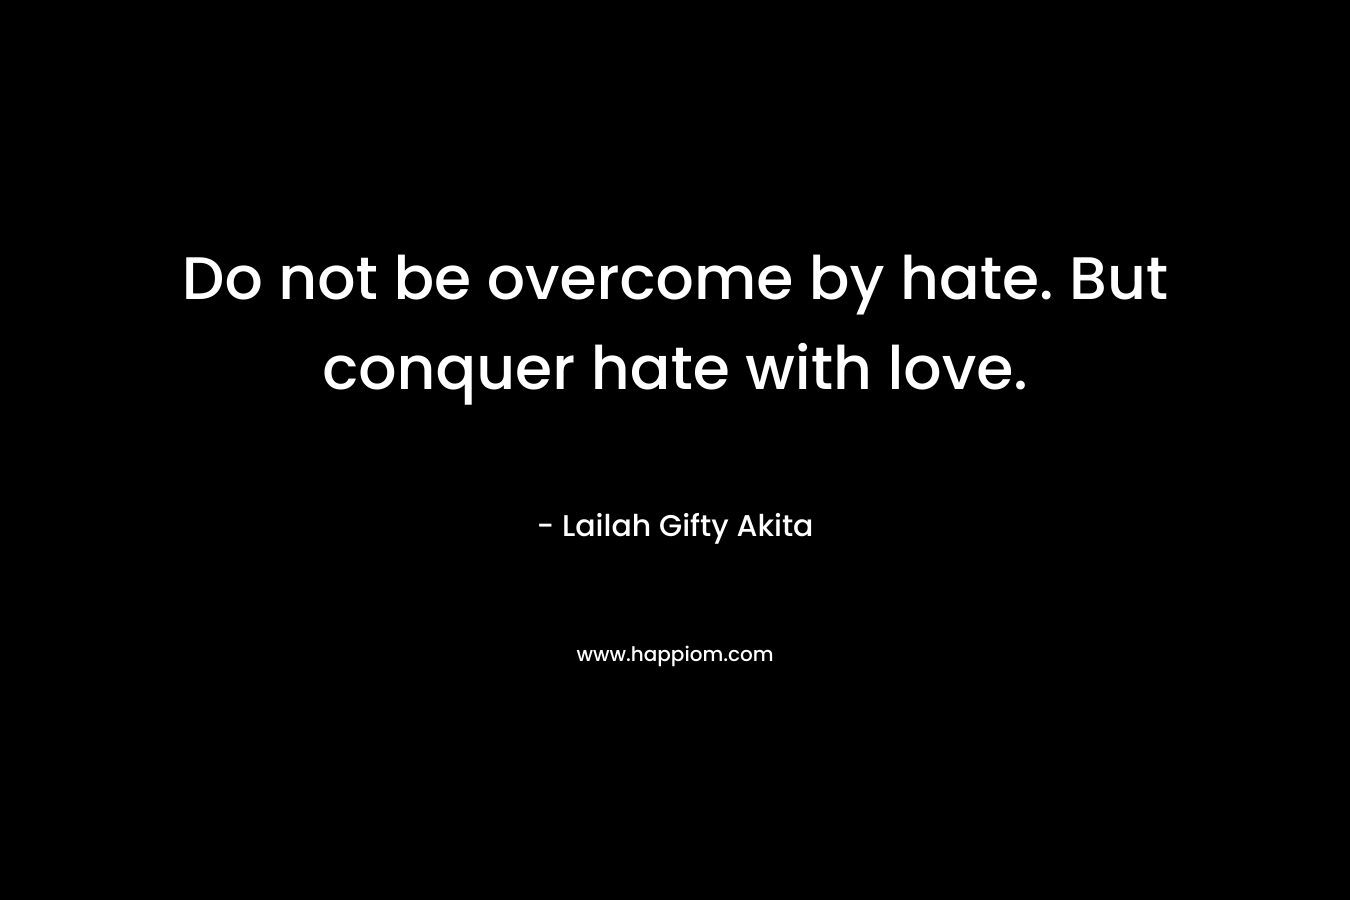 Do not be overcome by hate. But conquer hate with love.